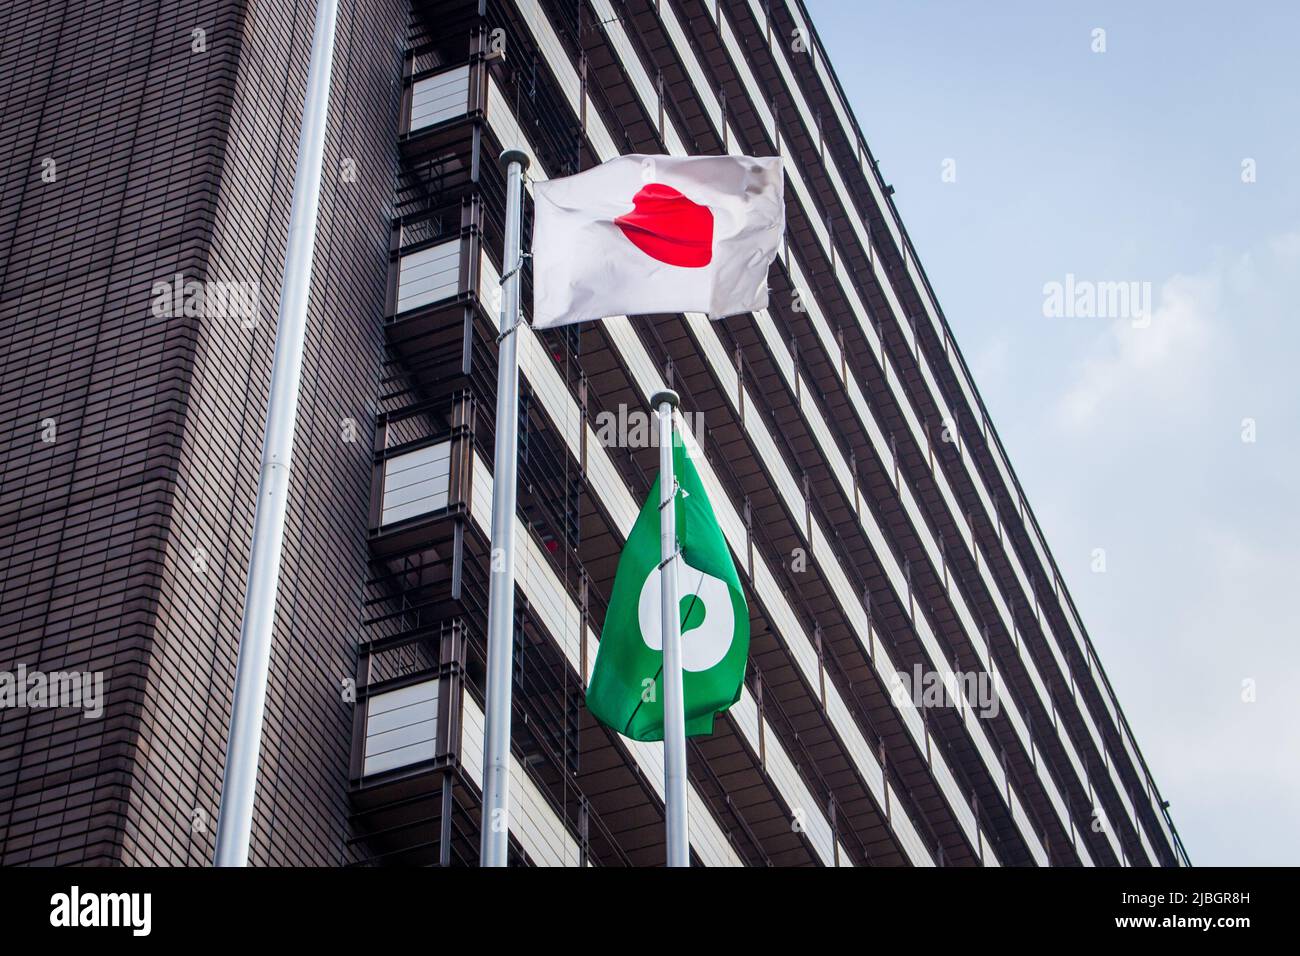 Japanese flag and Kumamoto city flag which are attached to flag poles. Kumamoto city flag was defined in 1969. fluttering in the breeze Stock Photo